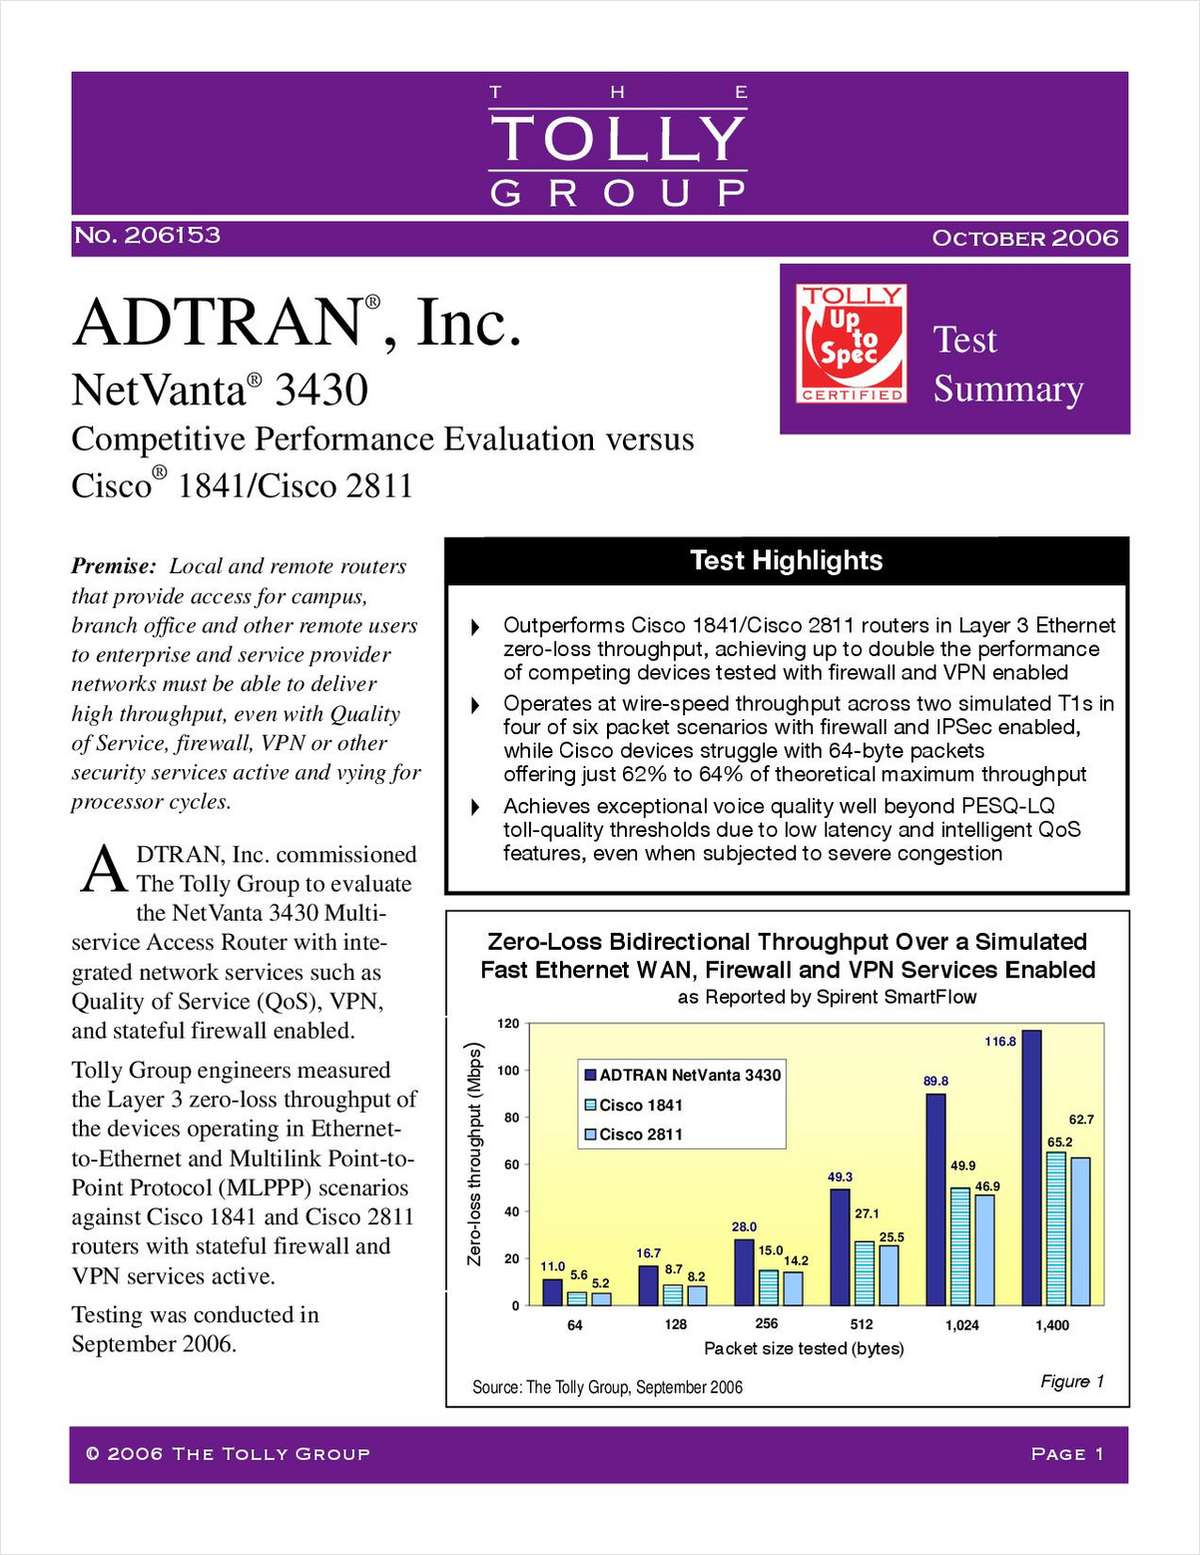 ADTRAN Outperforms Cisco in Tolly Group Tests